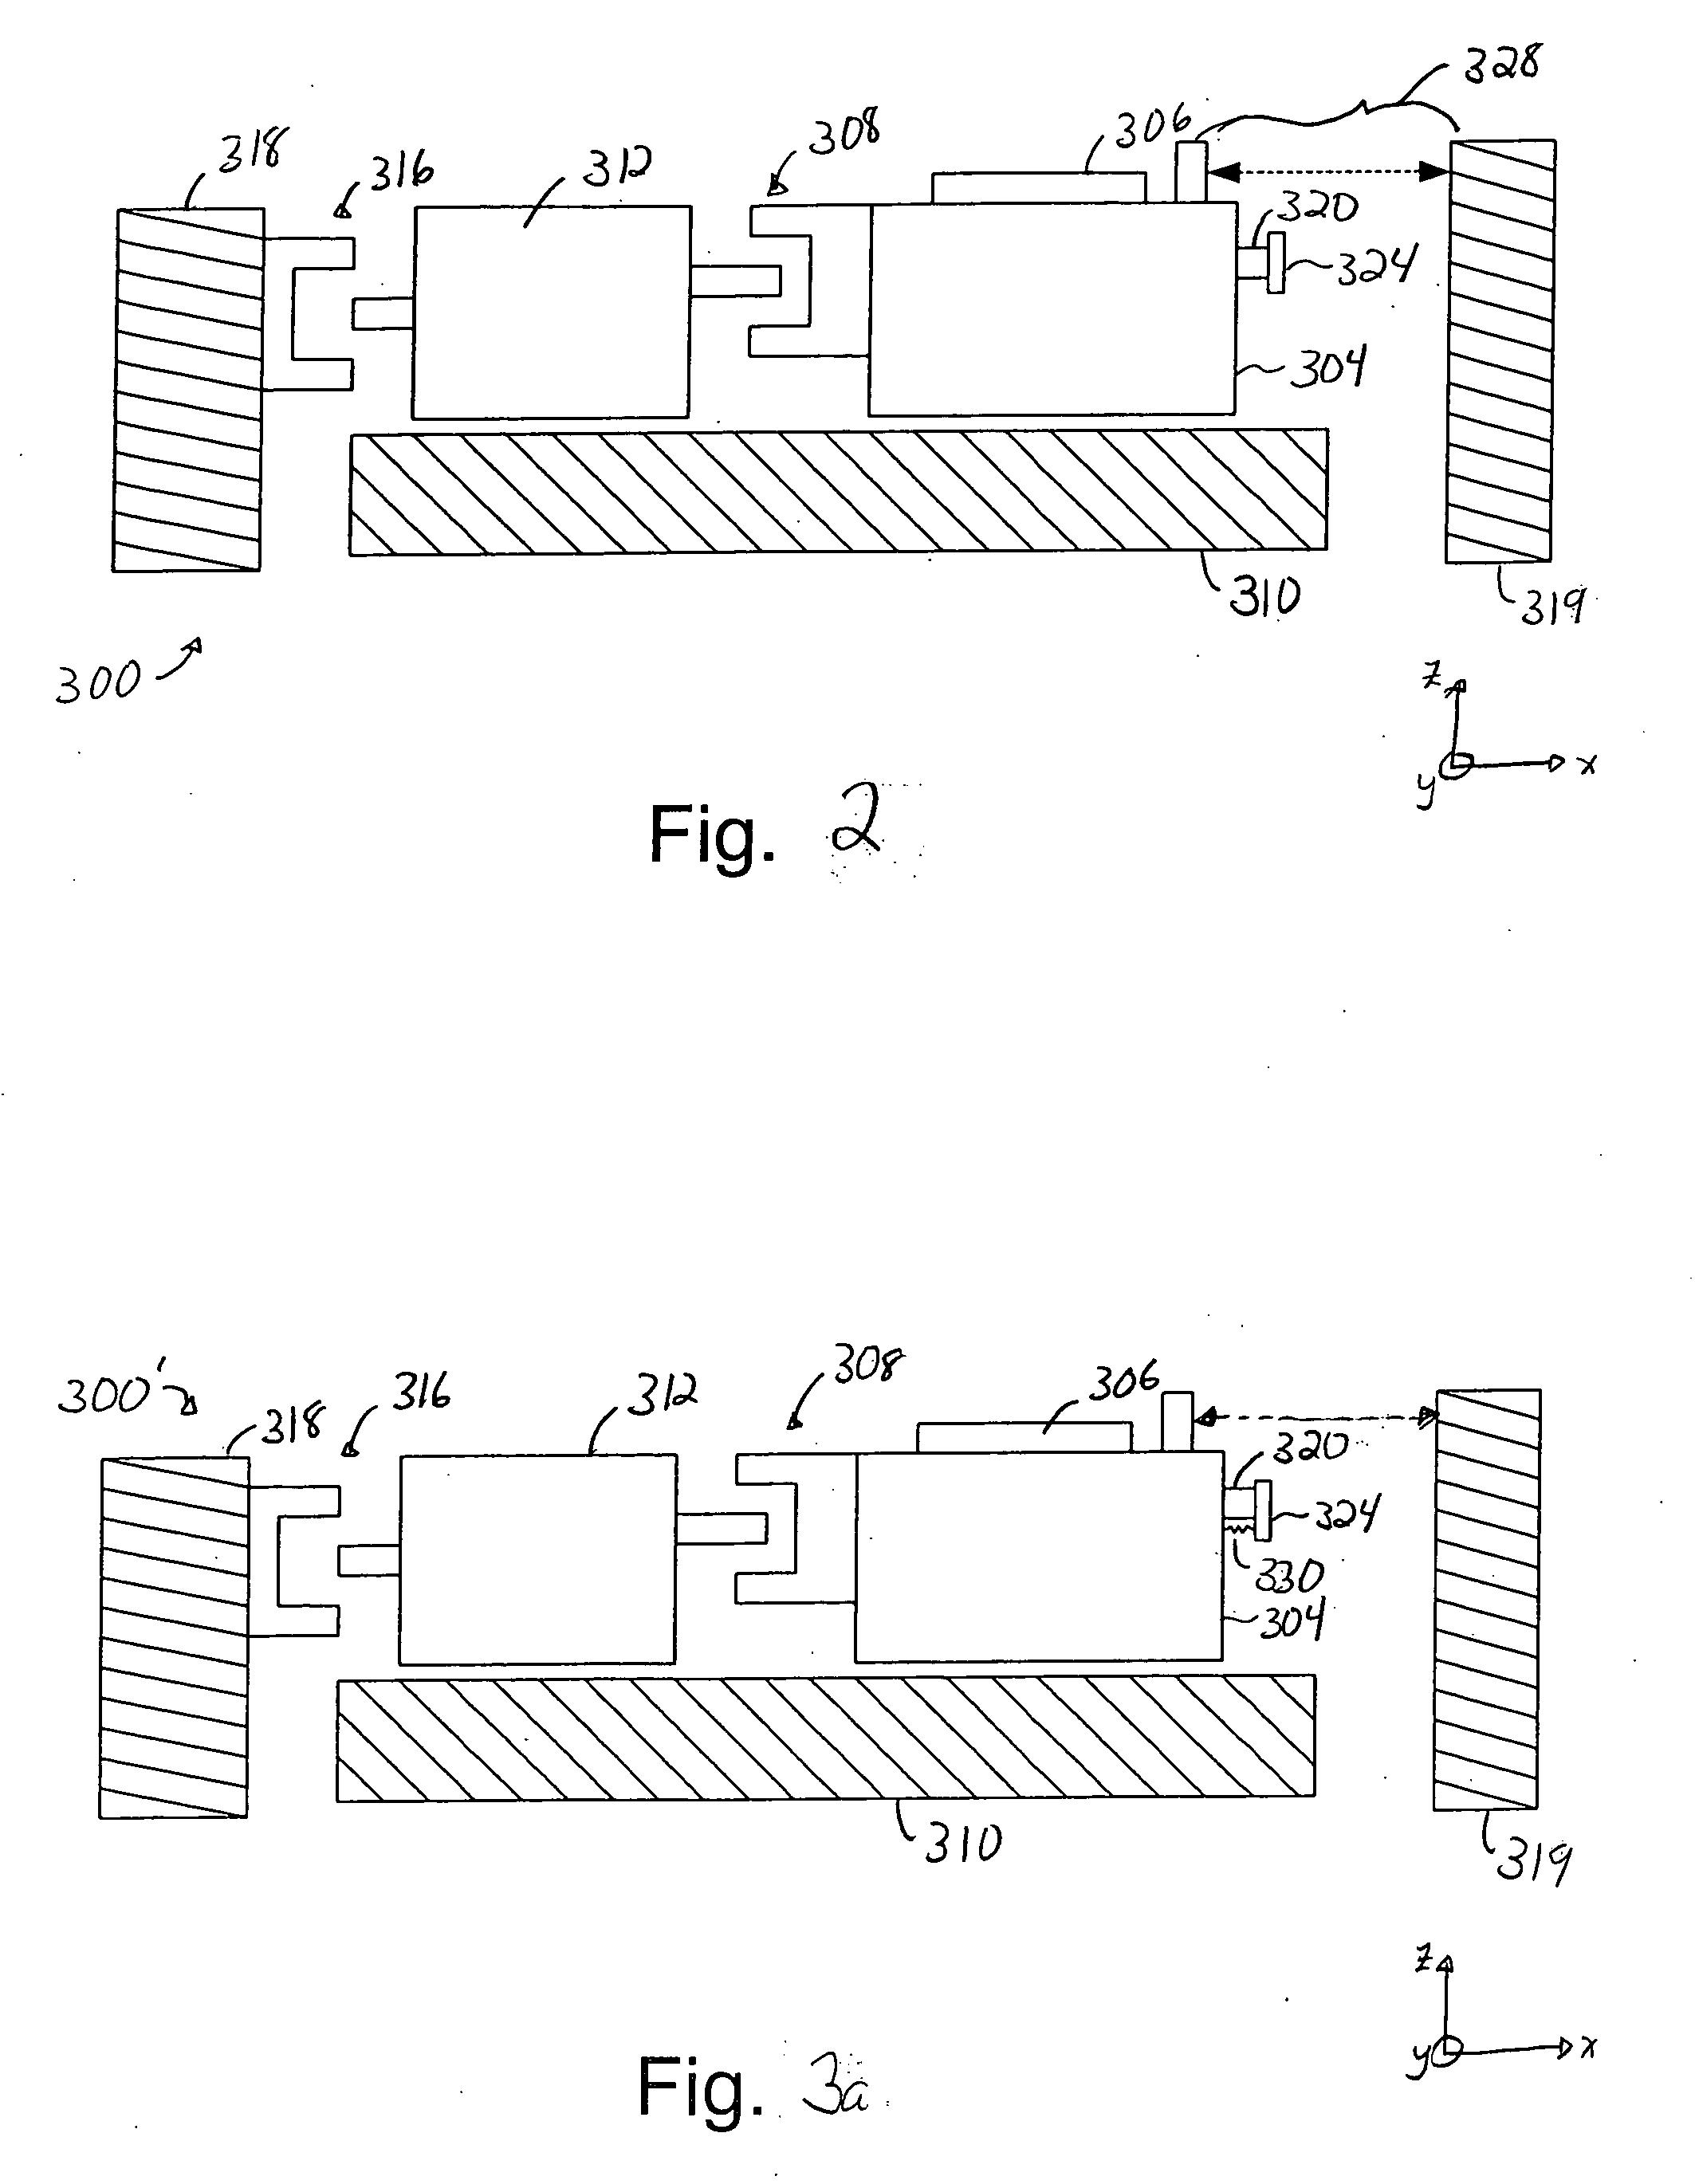 Moving mechanism with high bandwidth response and low force transmissibility